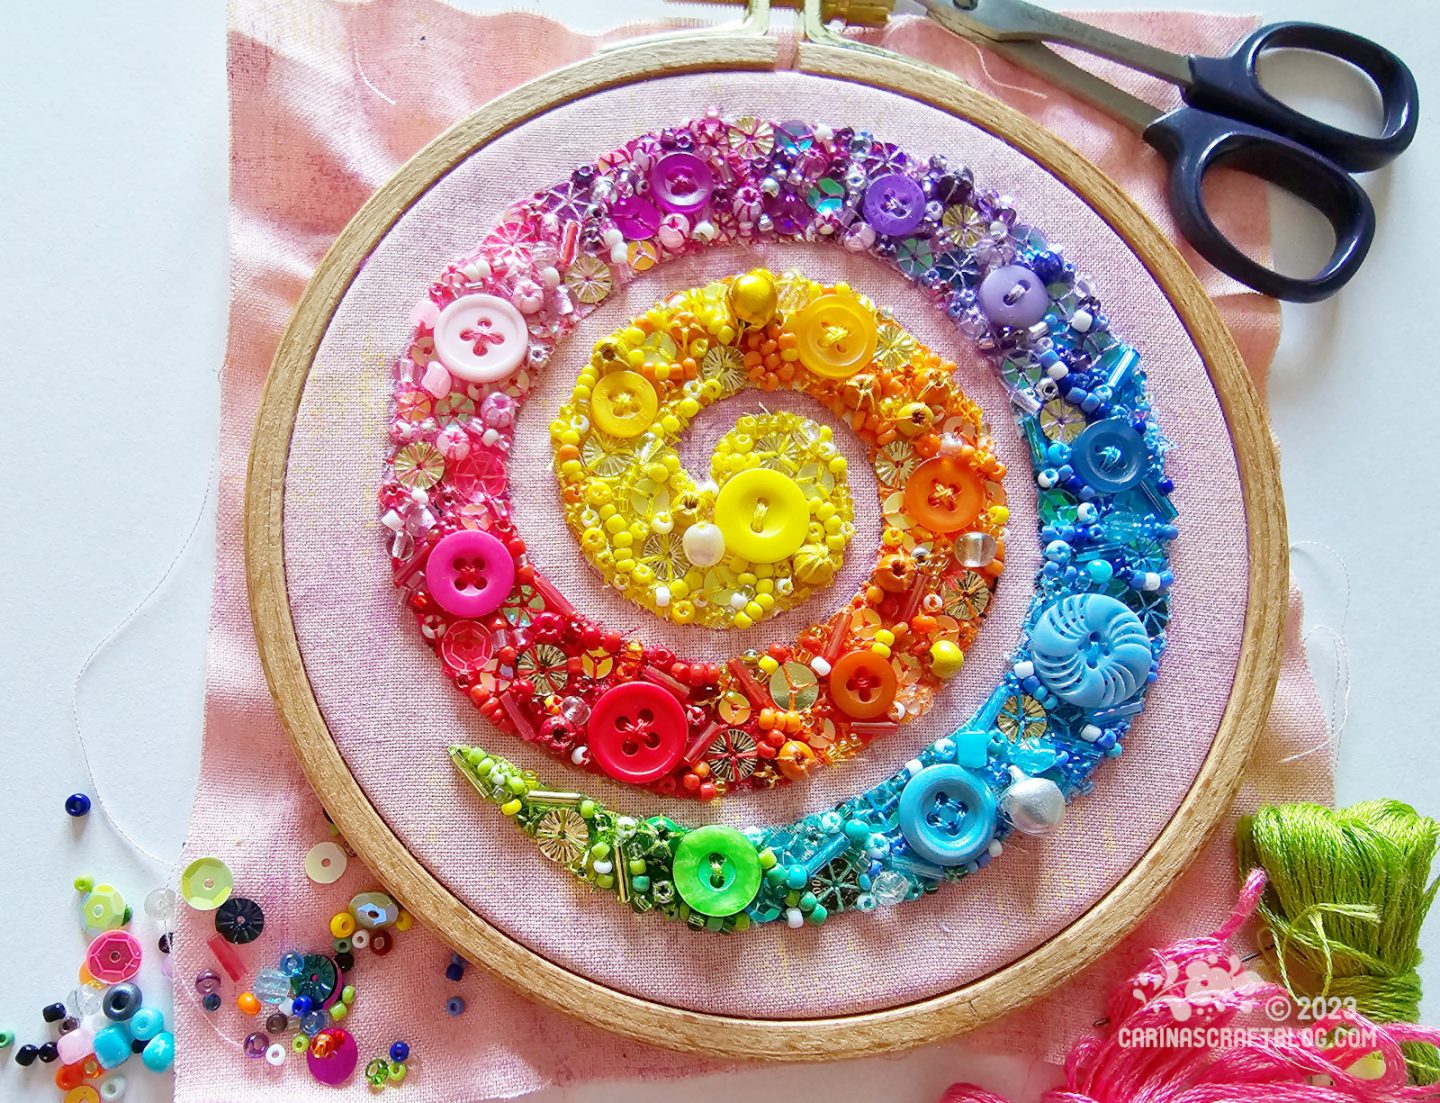 Over head view of wooden embroidery hoop with pale pink fabric. On the fabric is a large spiral filled with fabric, beads and sequins in rainbow order, starting with yellow in the middle and green at the outer end.